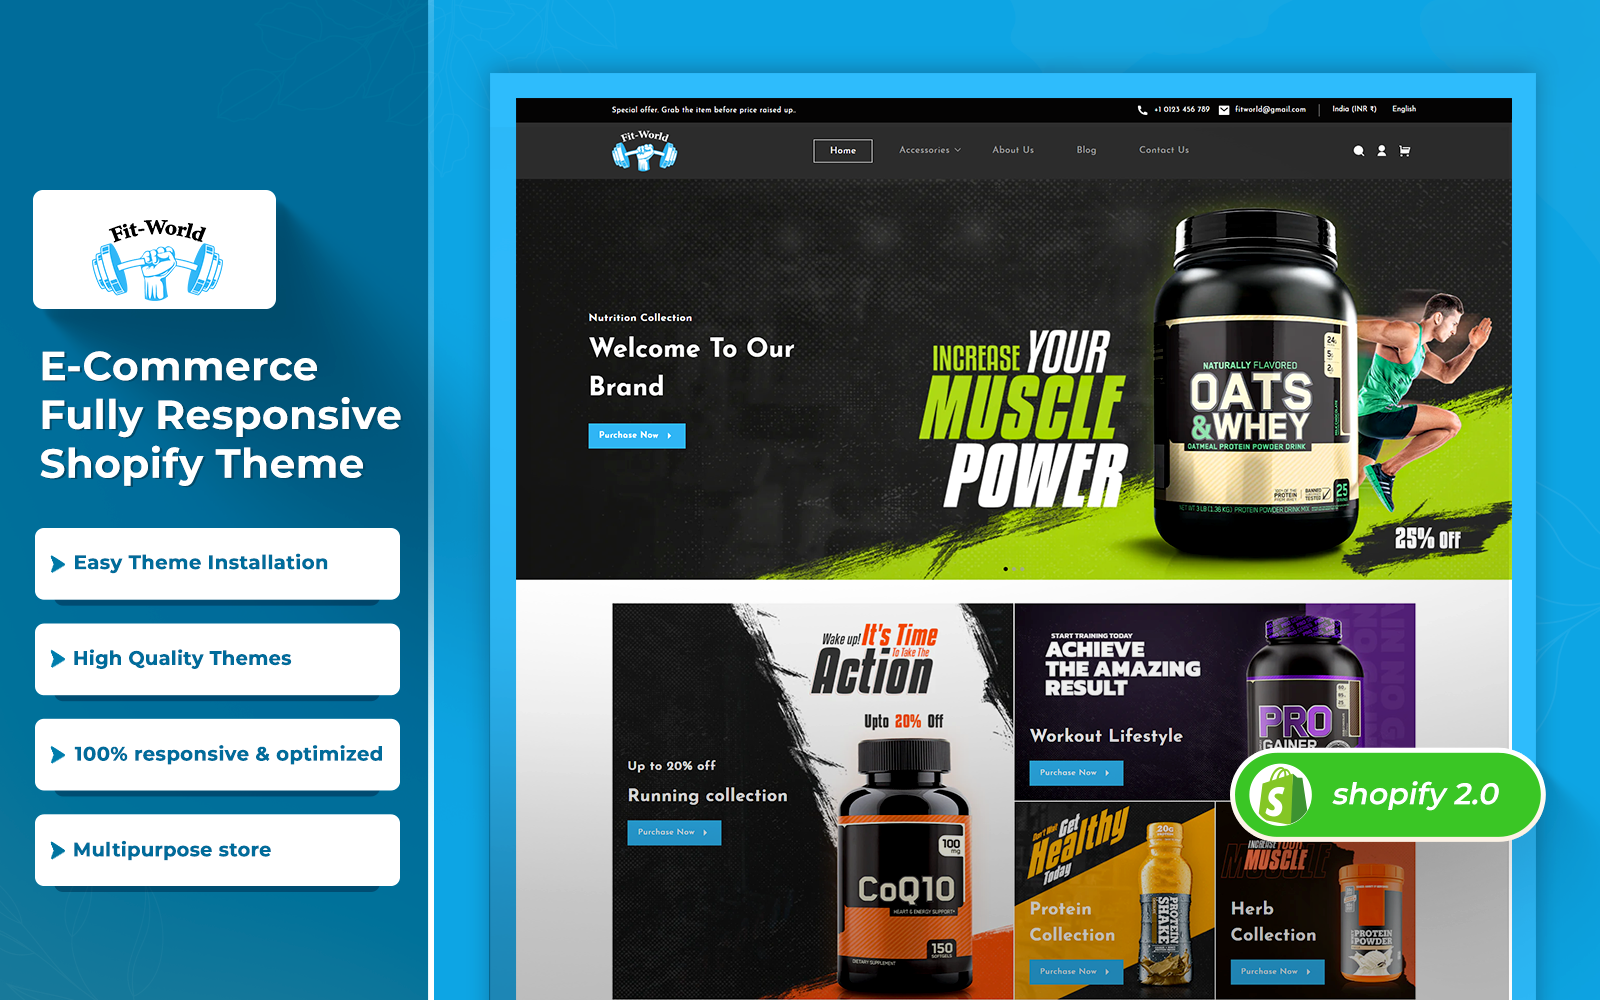 Fit-world - Gym supplements & Bodybuilding Supplements  Responsive Theme Shopify 2.0